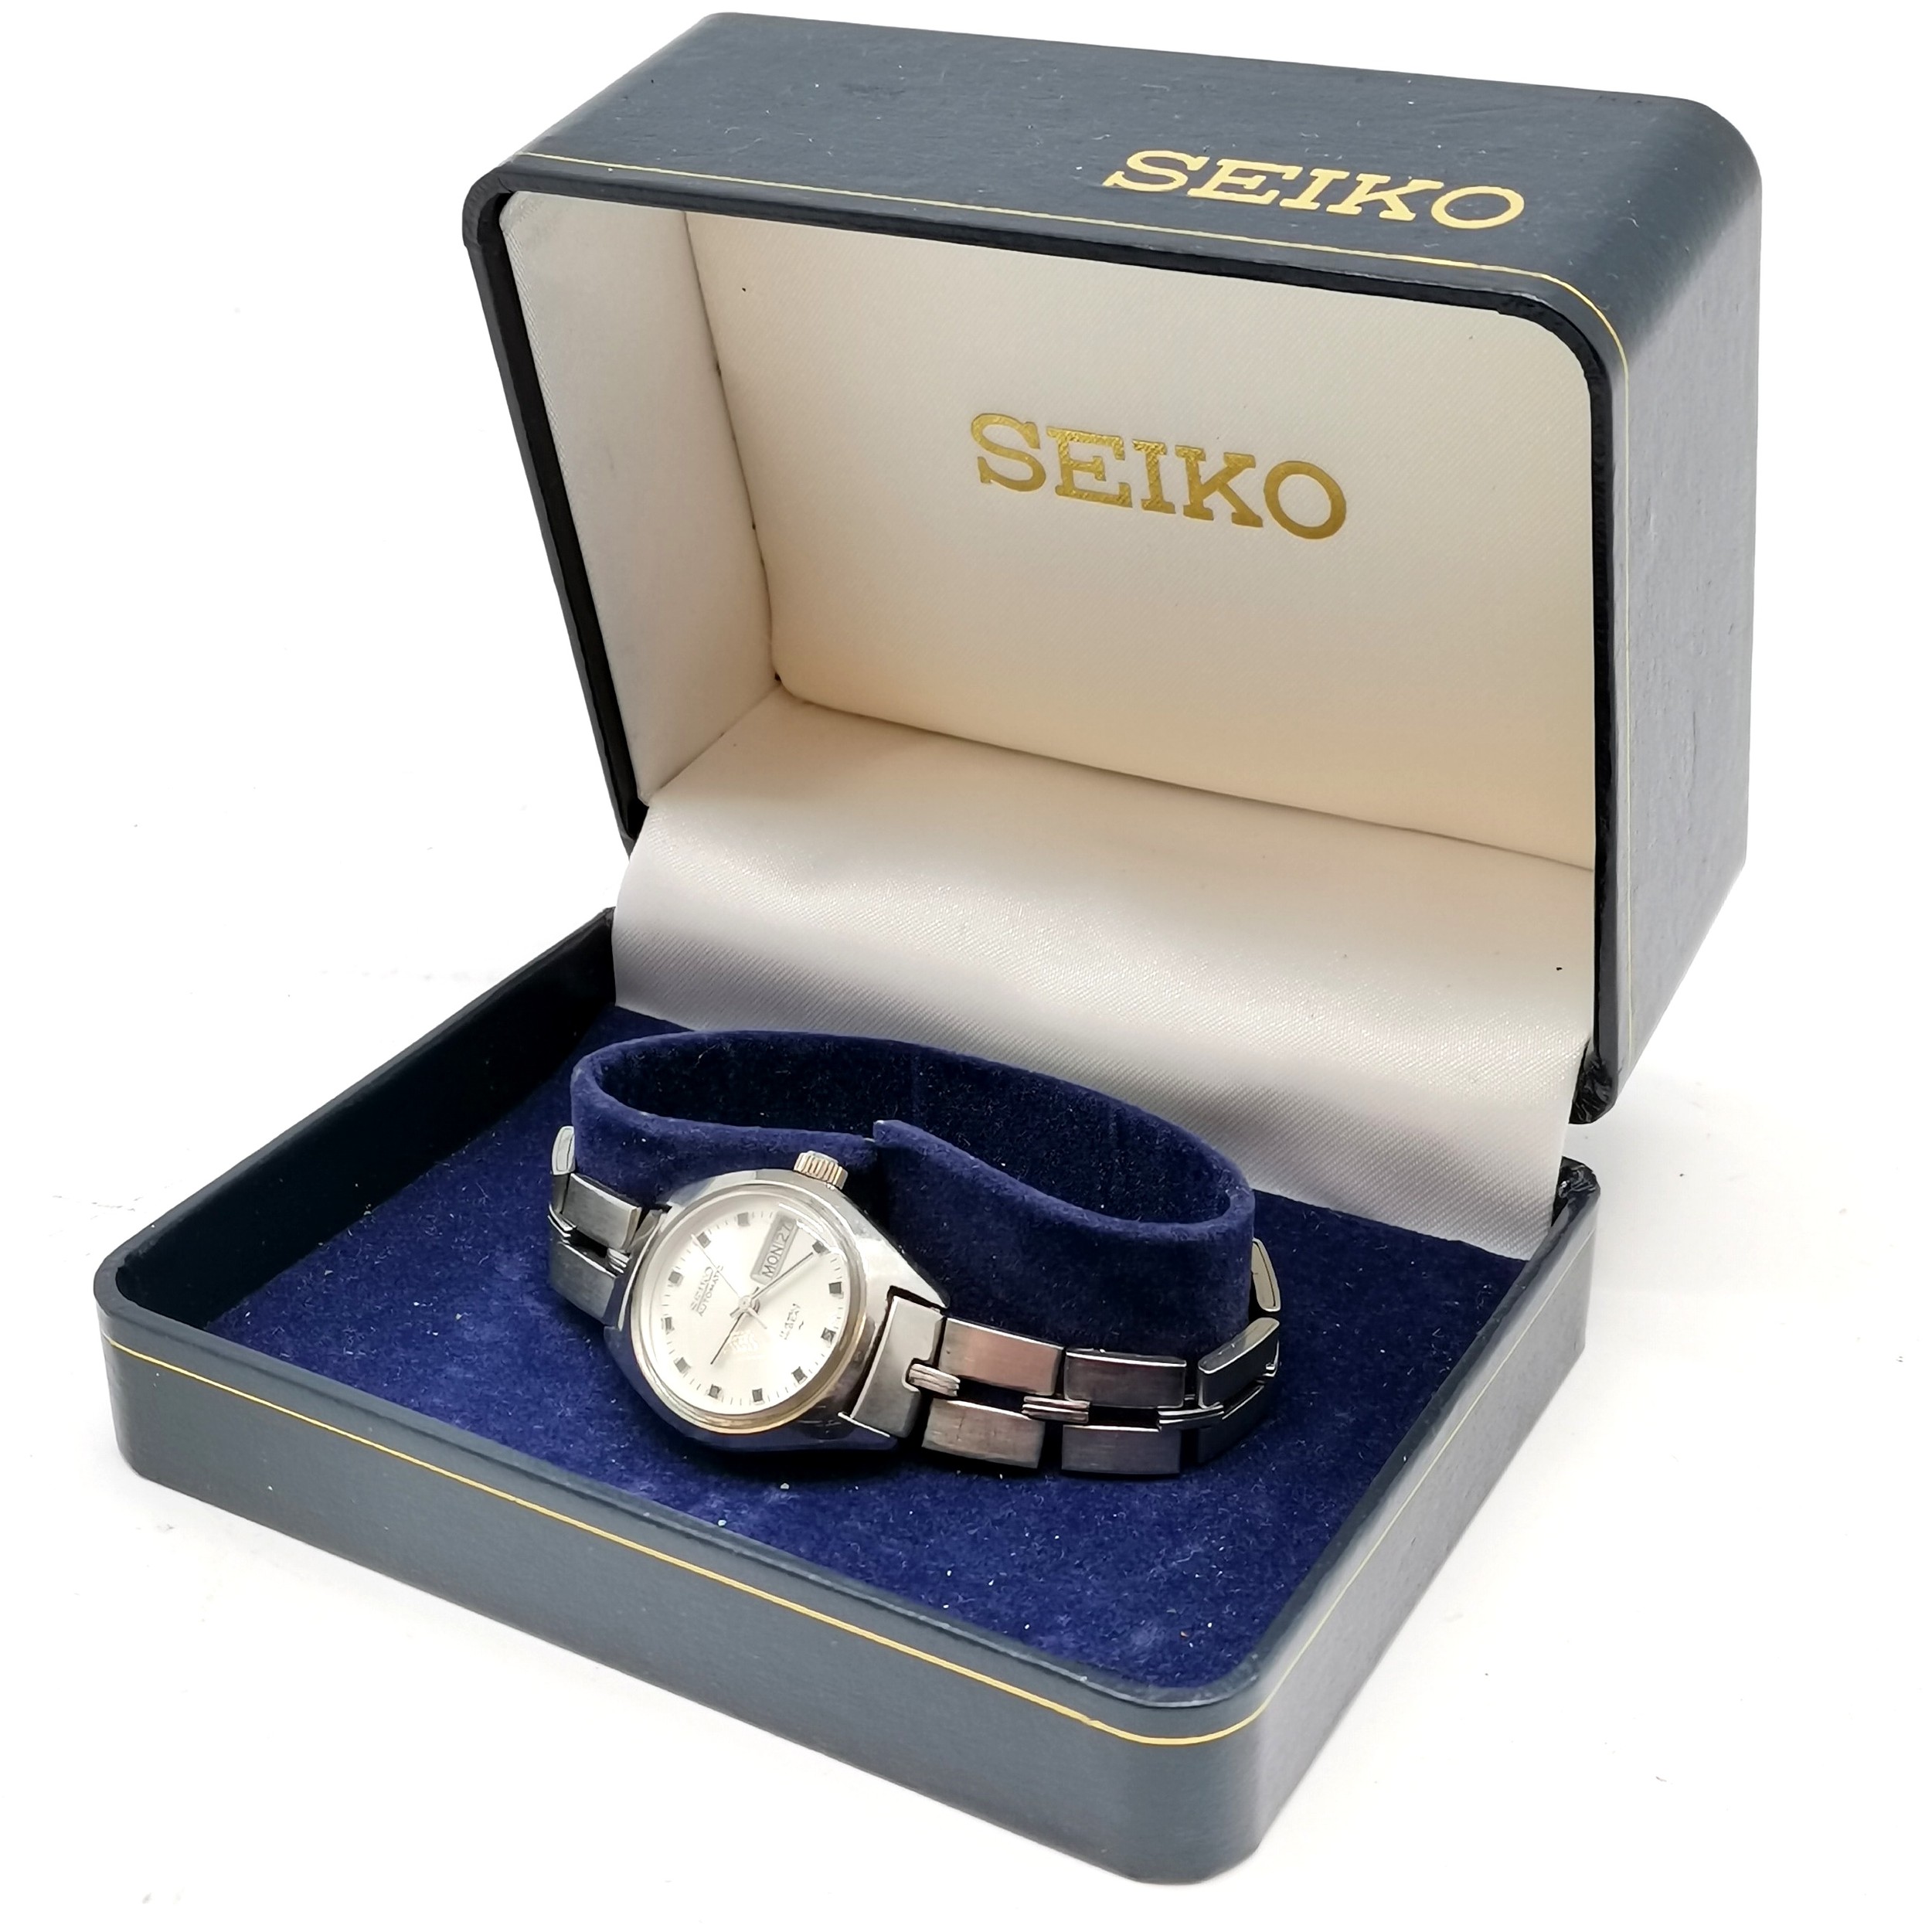 Seiko automatic ladies vintage high-beat wristwatch with day / date aperture (22mm case) in an